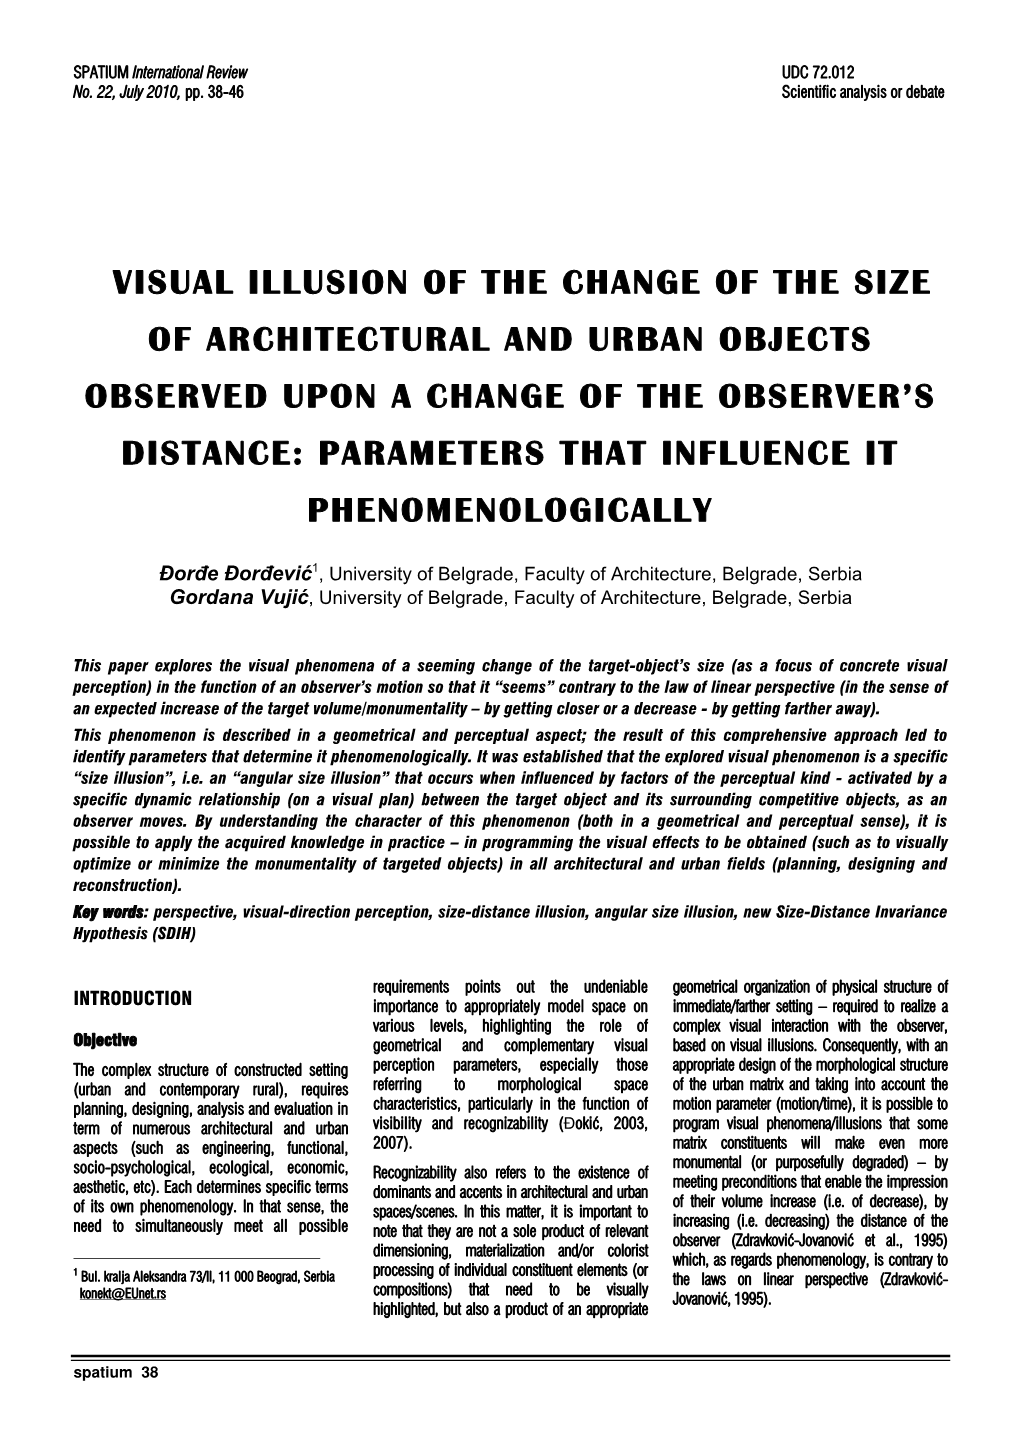 Visual Illusion of the Change of the Size Of